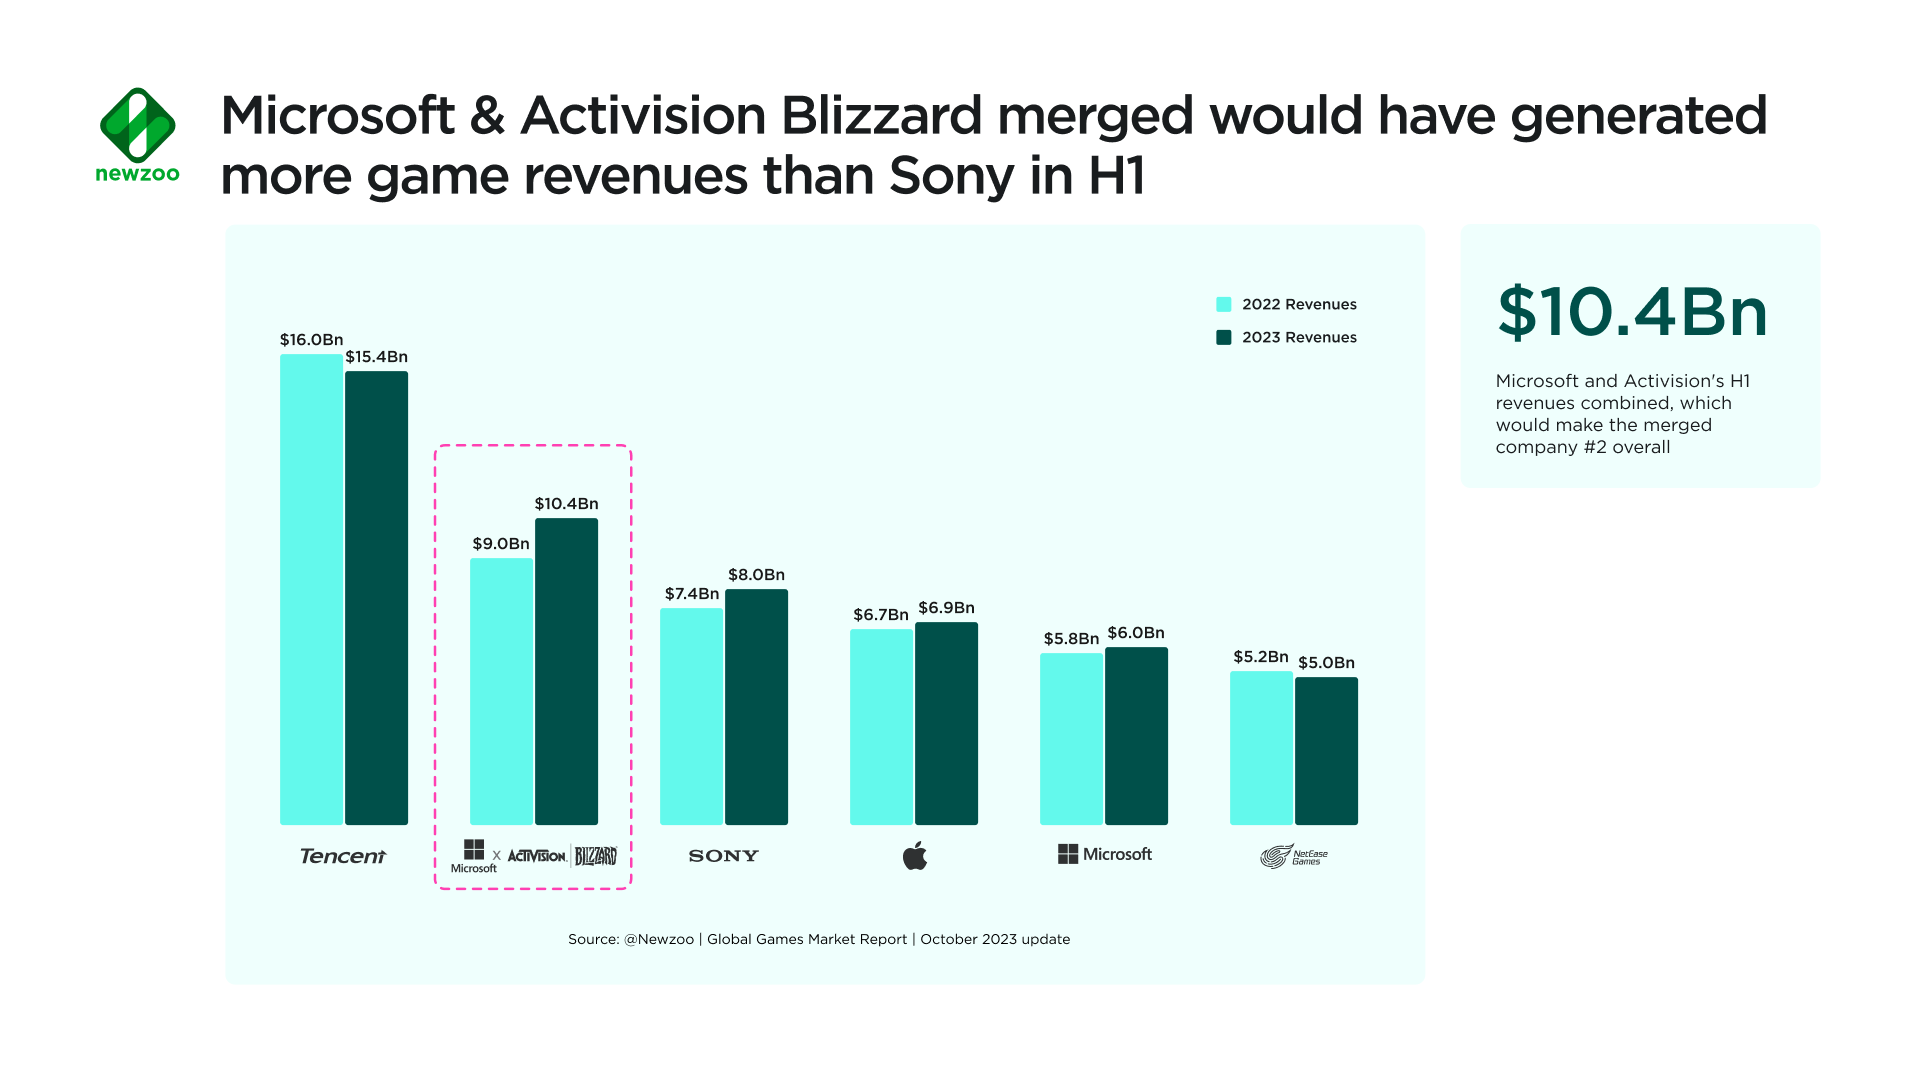 microsoft and activision blizzard merged would have generated more game revenues than sony in h1 2